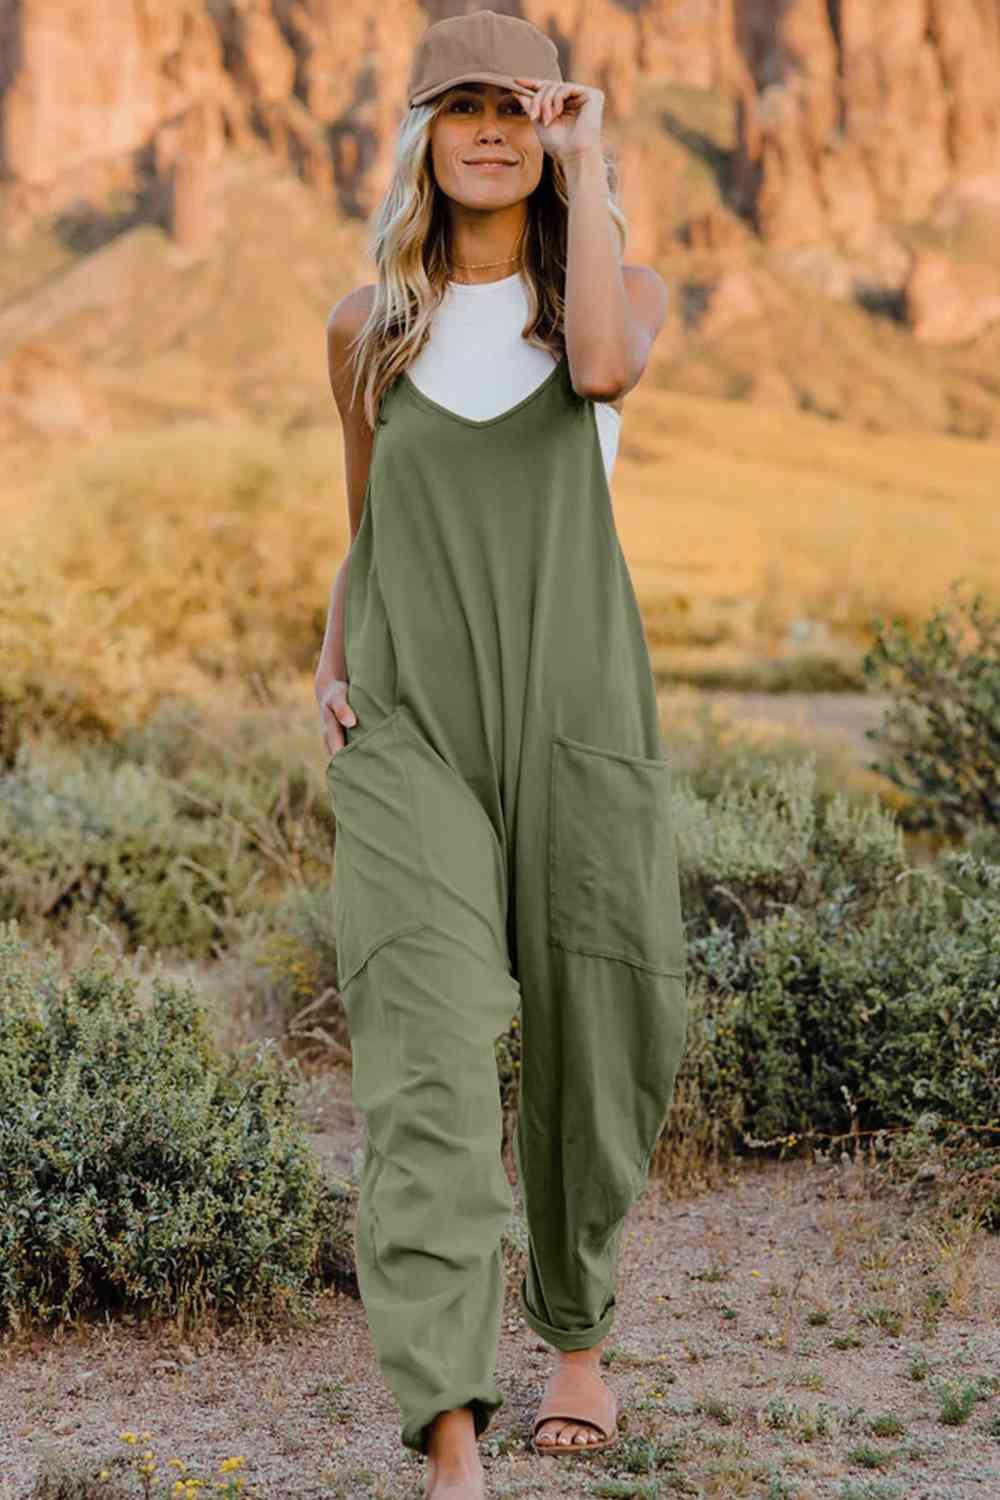 Double Take V-Neck Sleeveless Jumpsuit with Pockets - God's Girl Gifts And Apparel